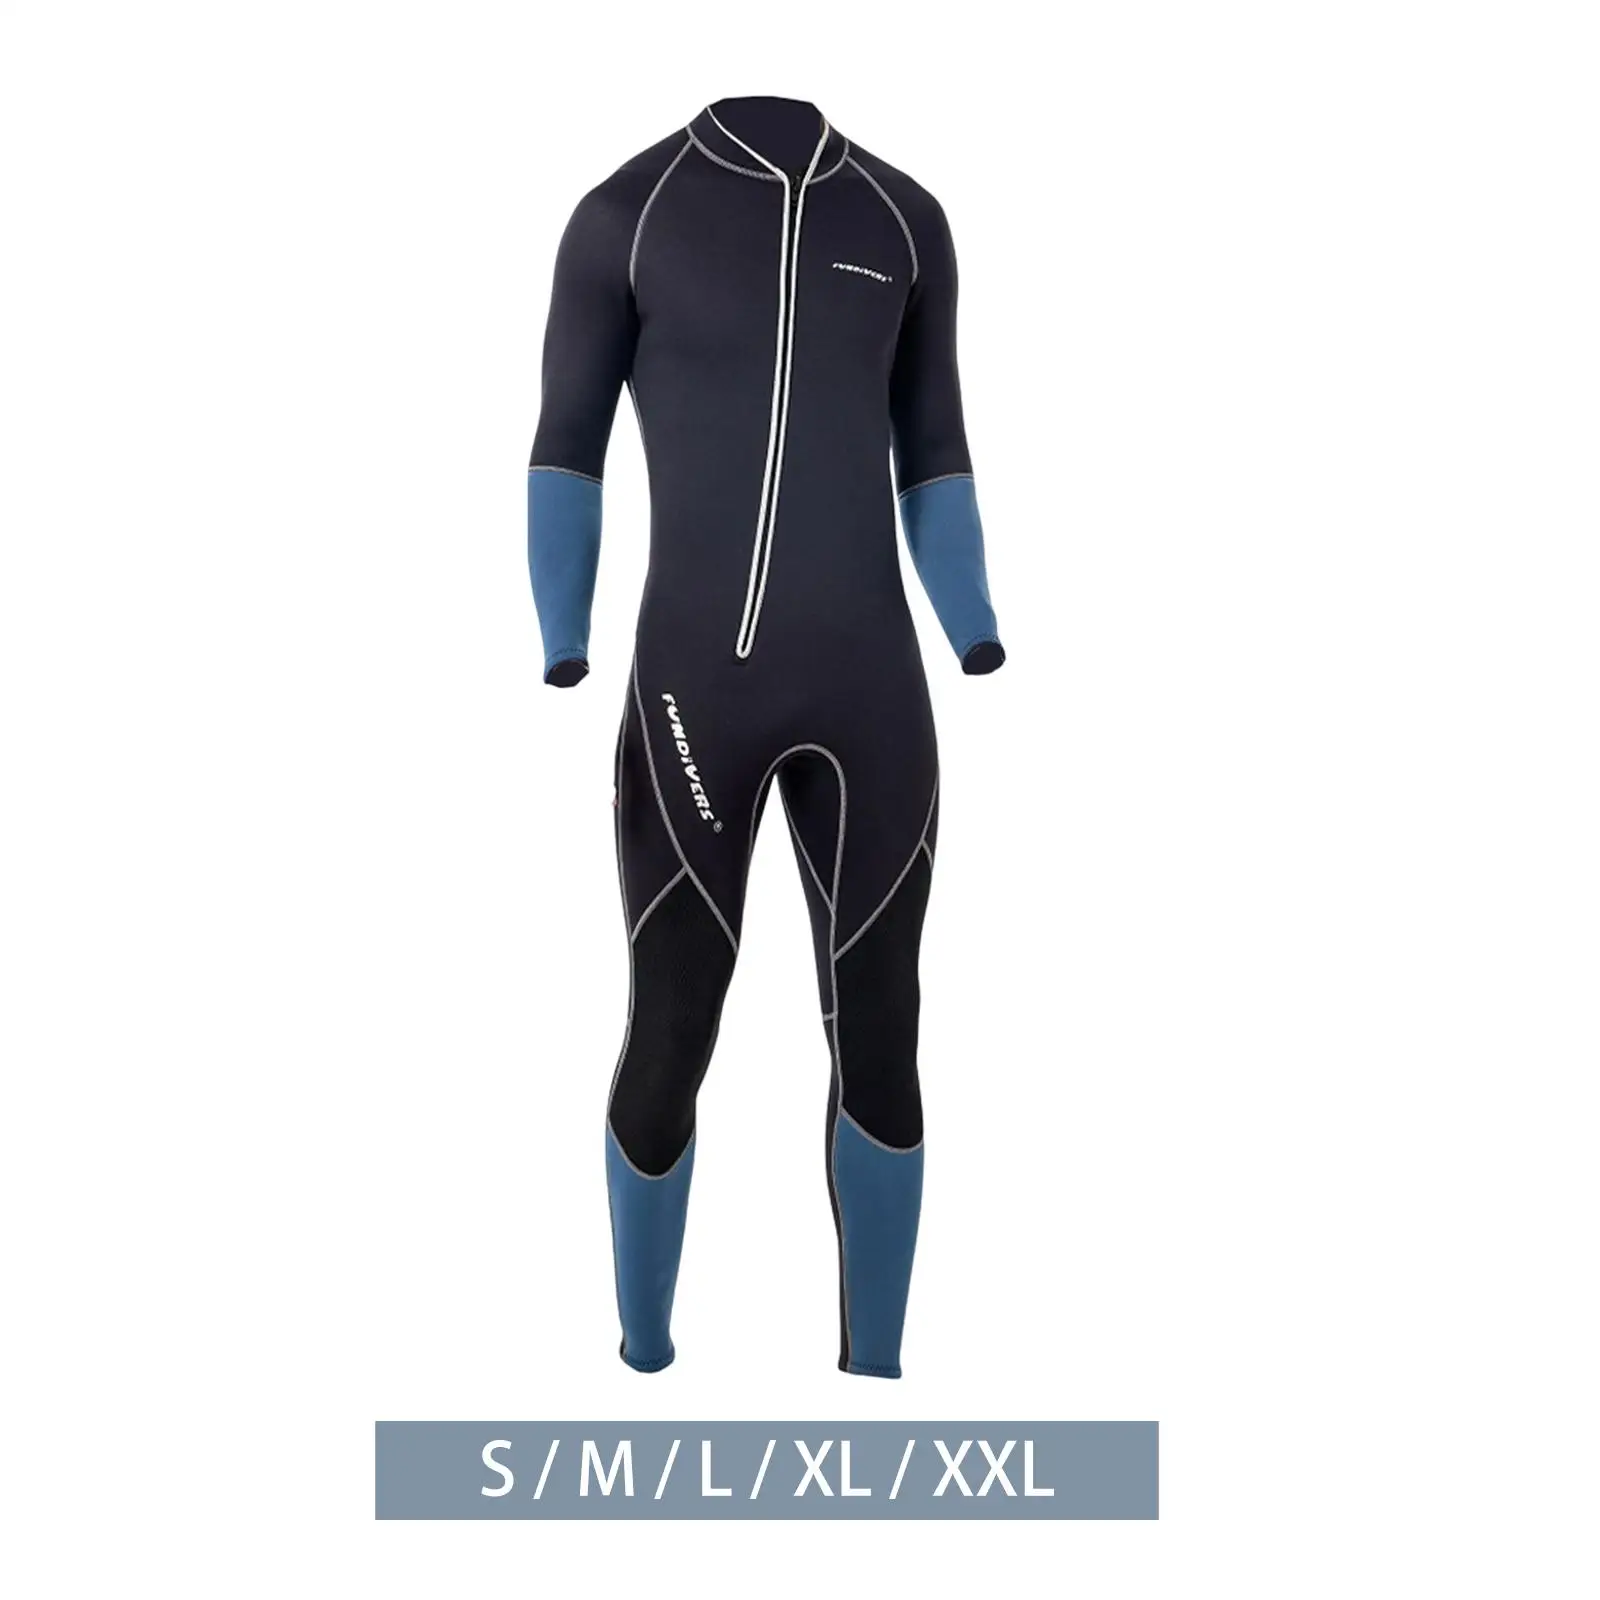 3mm Neoprene Wetsuit Waterproof Surfing Clothing Long Sleeve Thermal Scuba Diving Suit for Snorkeling Water Sports Scuba Diving